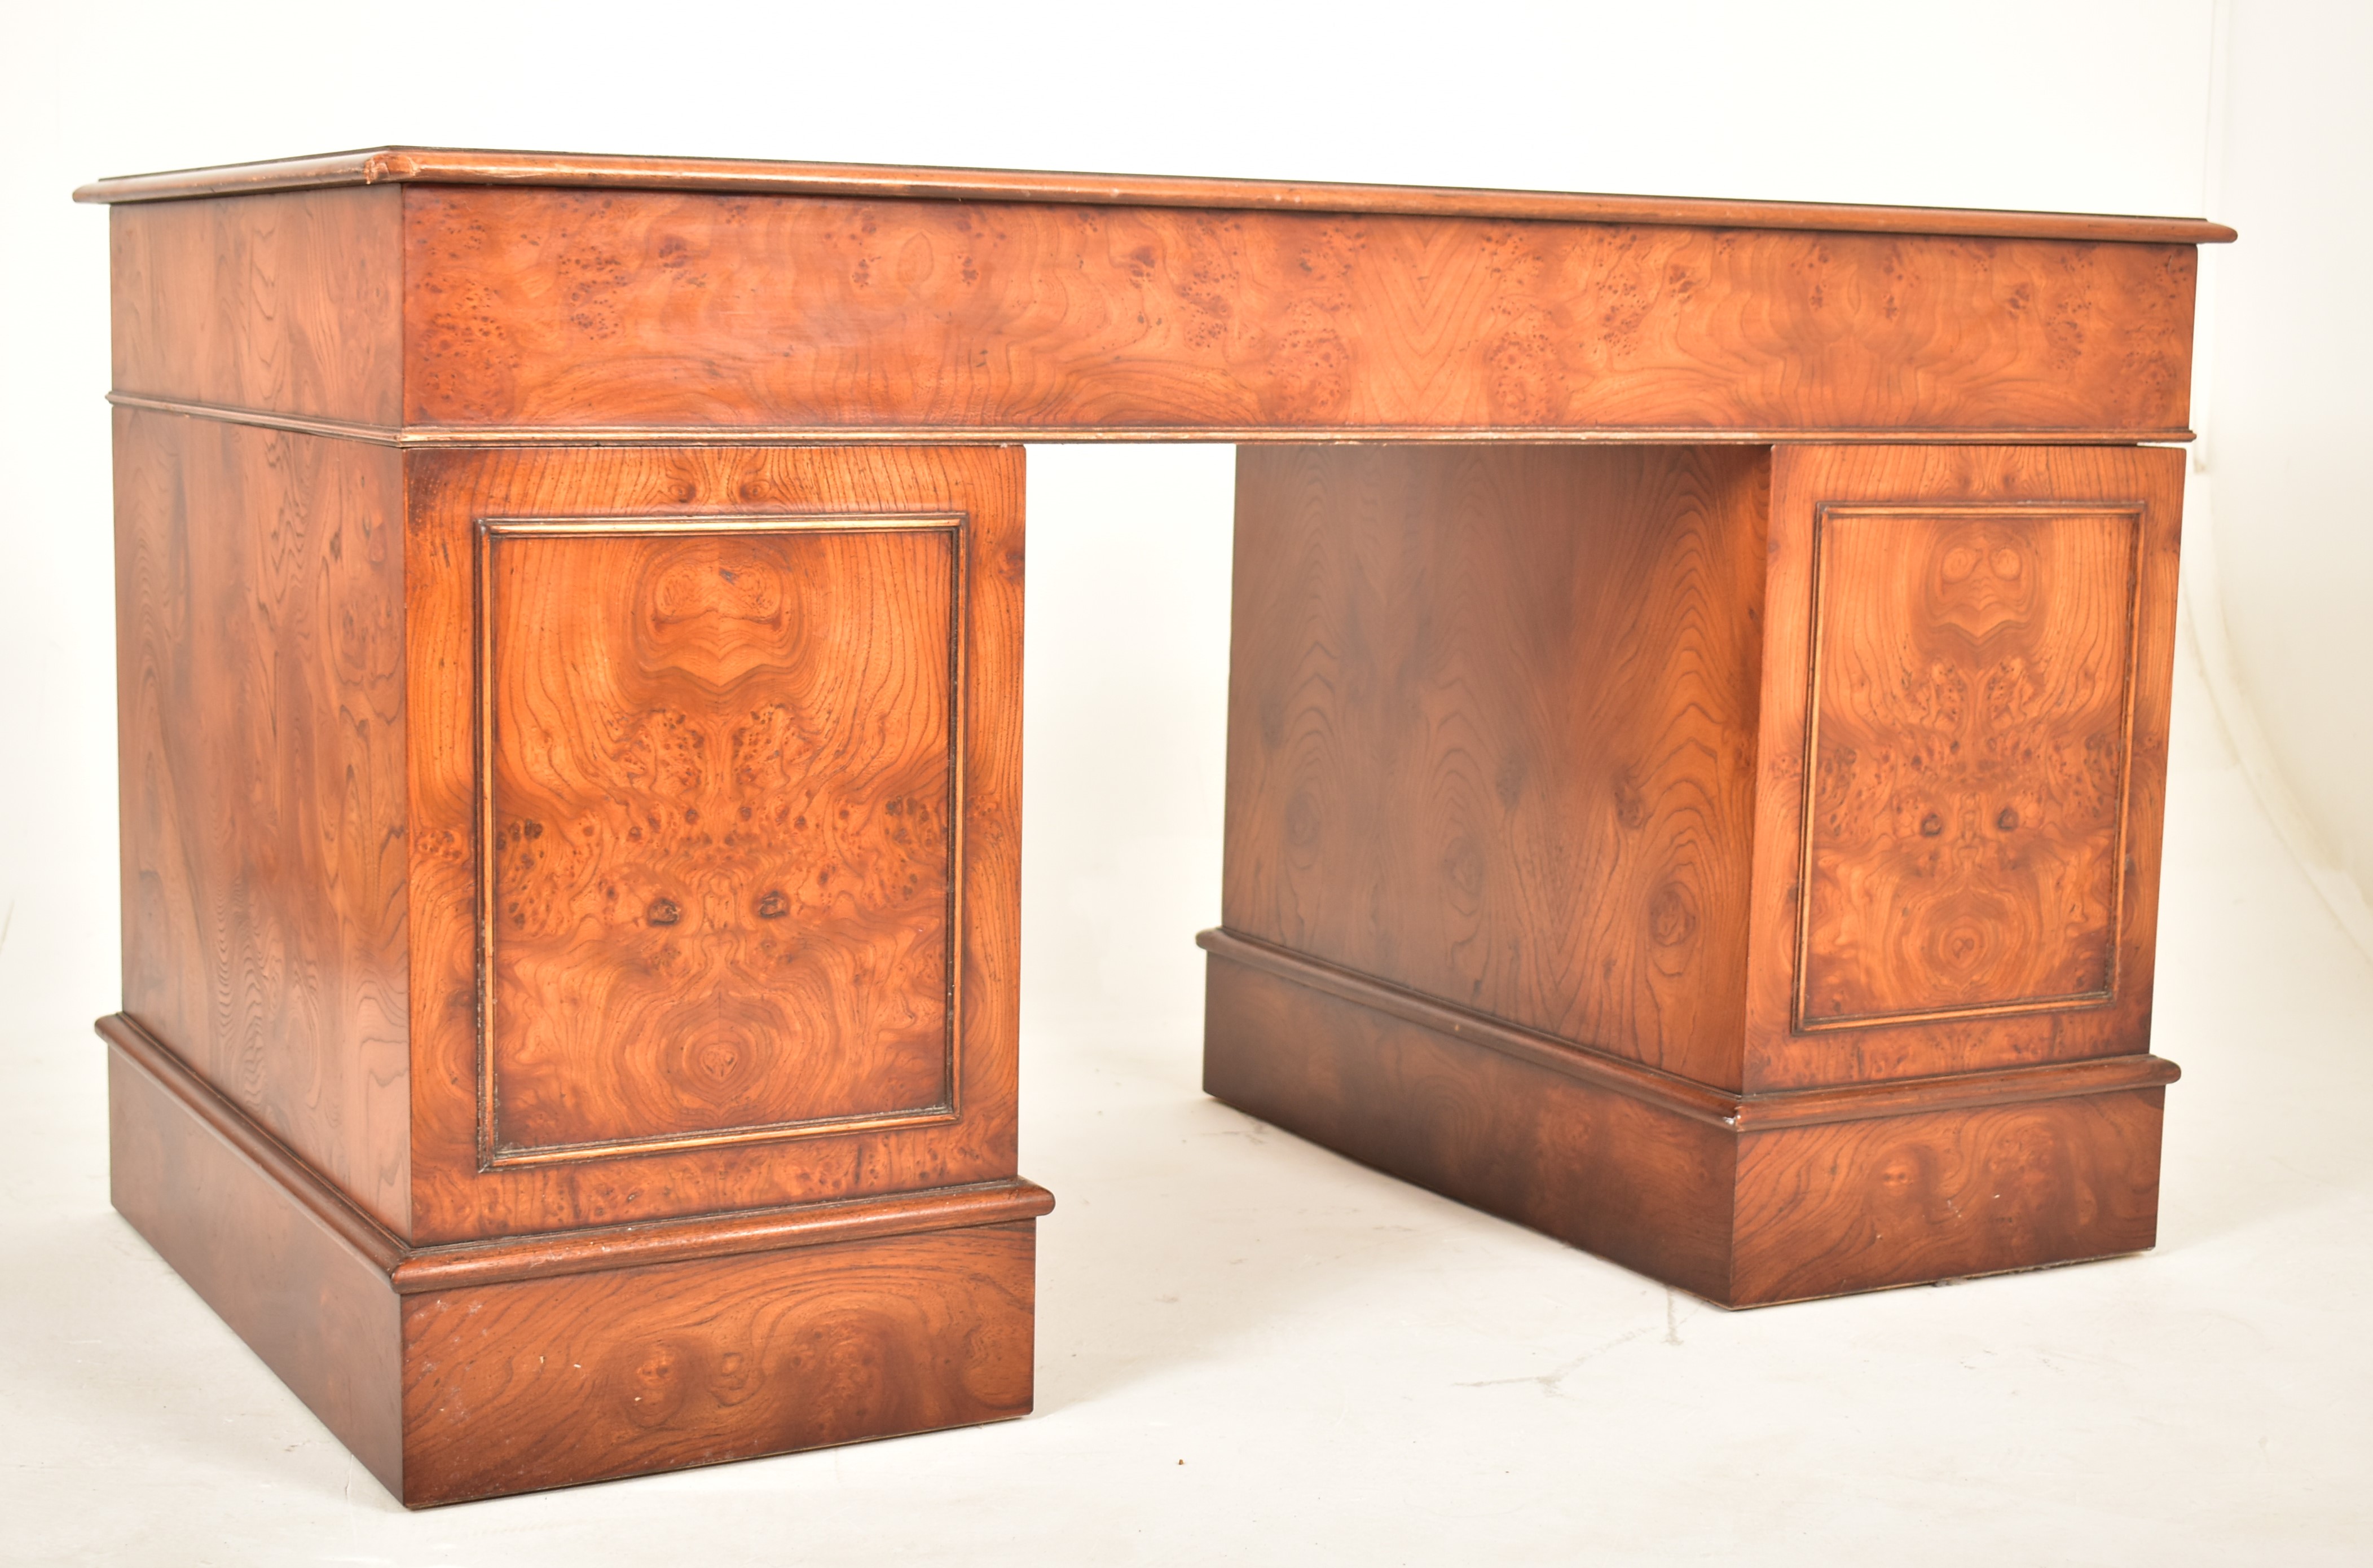 GEORGE III REVIVAL BURR WALNUT TWIN PEDESTAL DESK WITH CHAIR - Image 5 of 10